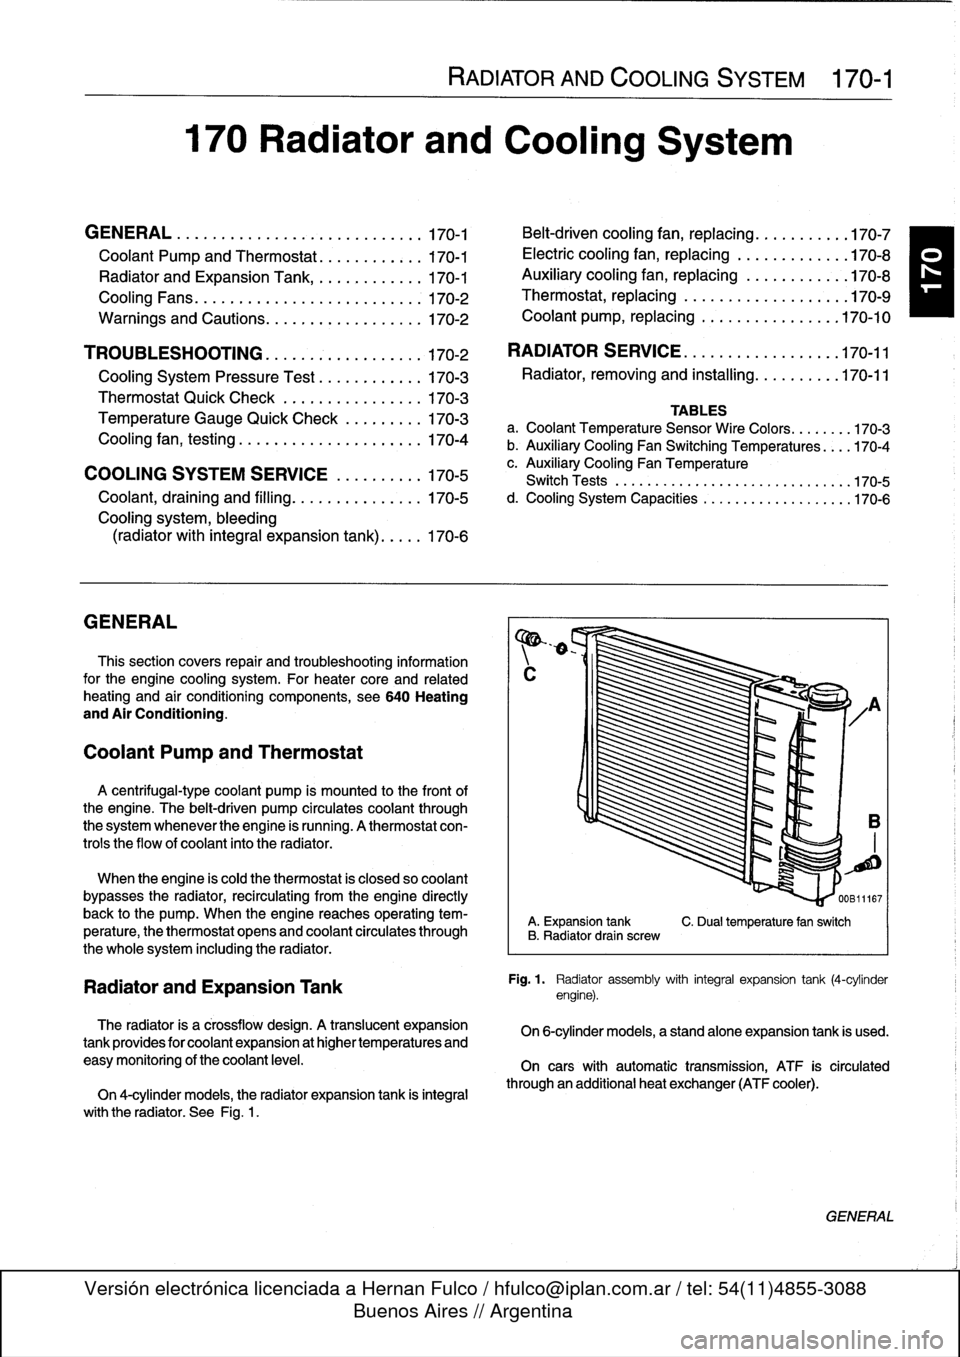 BMW 328i 1993 E36 Workshop Manual 170
Radiator
and
Cooling
System

GENERAL
.
.
.....
.
...
.
.
.
.
.
....
.
.
.
.
.
.
.
.170-1

Coolant
Pump
and
Thermostat
........
.
.
.
.
170-1

Radiator
and
Expansion
Tank
.........
.
...
170-1

Coo